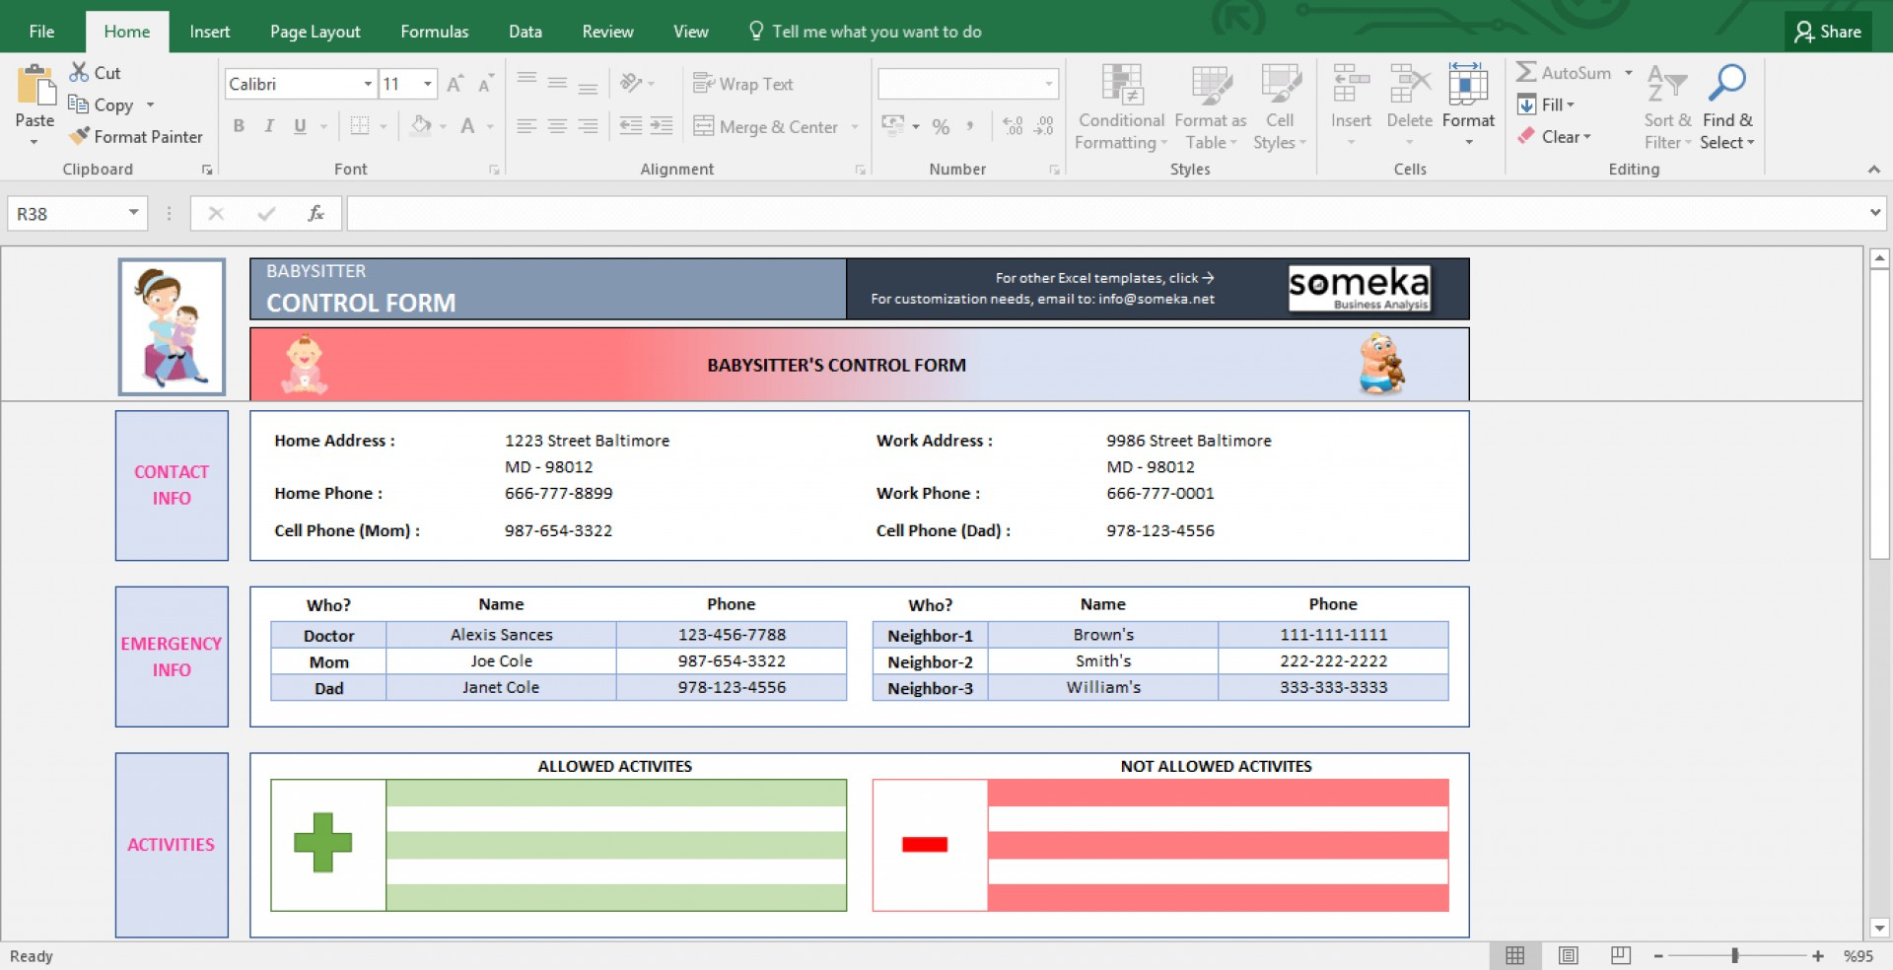 creating-a-data-entry-form-in-excel-journal-of-accountancy